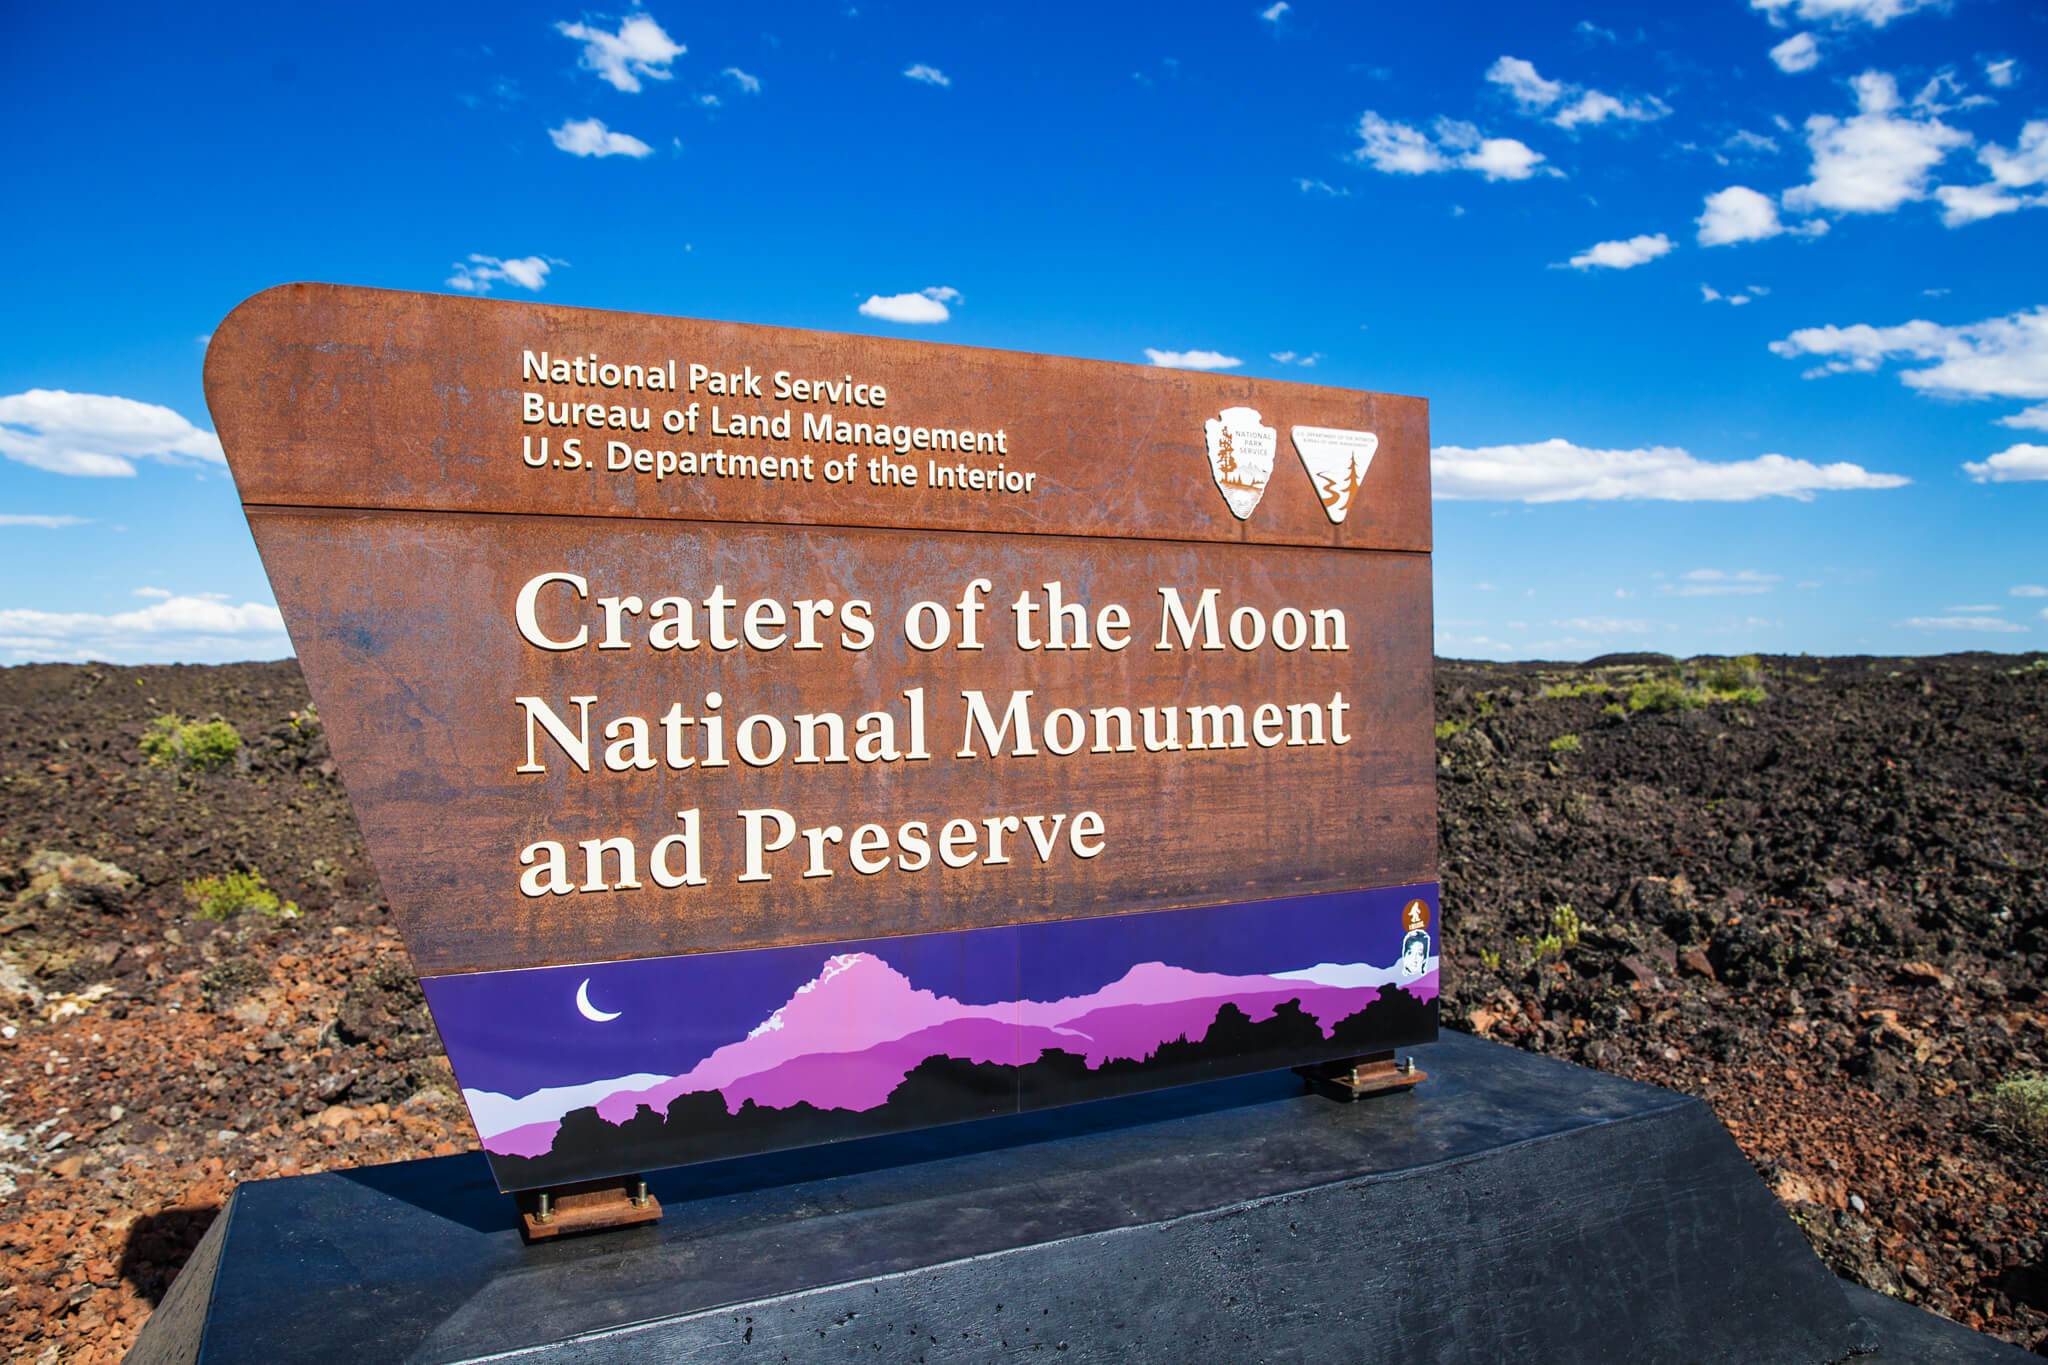 Craters of the Moon National Monument and Preserve signage at entrance of the park with a dark sky illustration at the bottom.